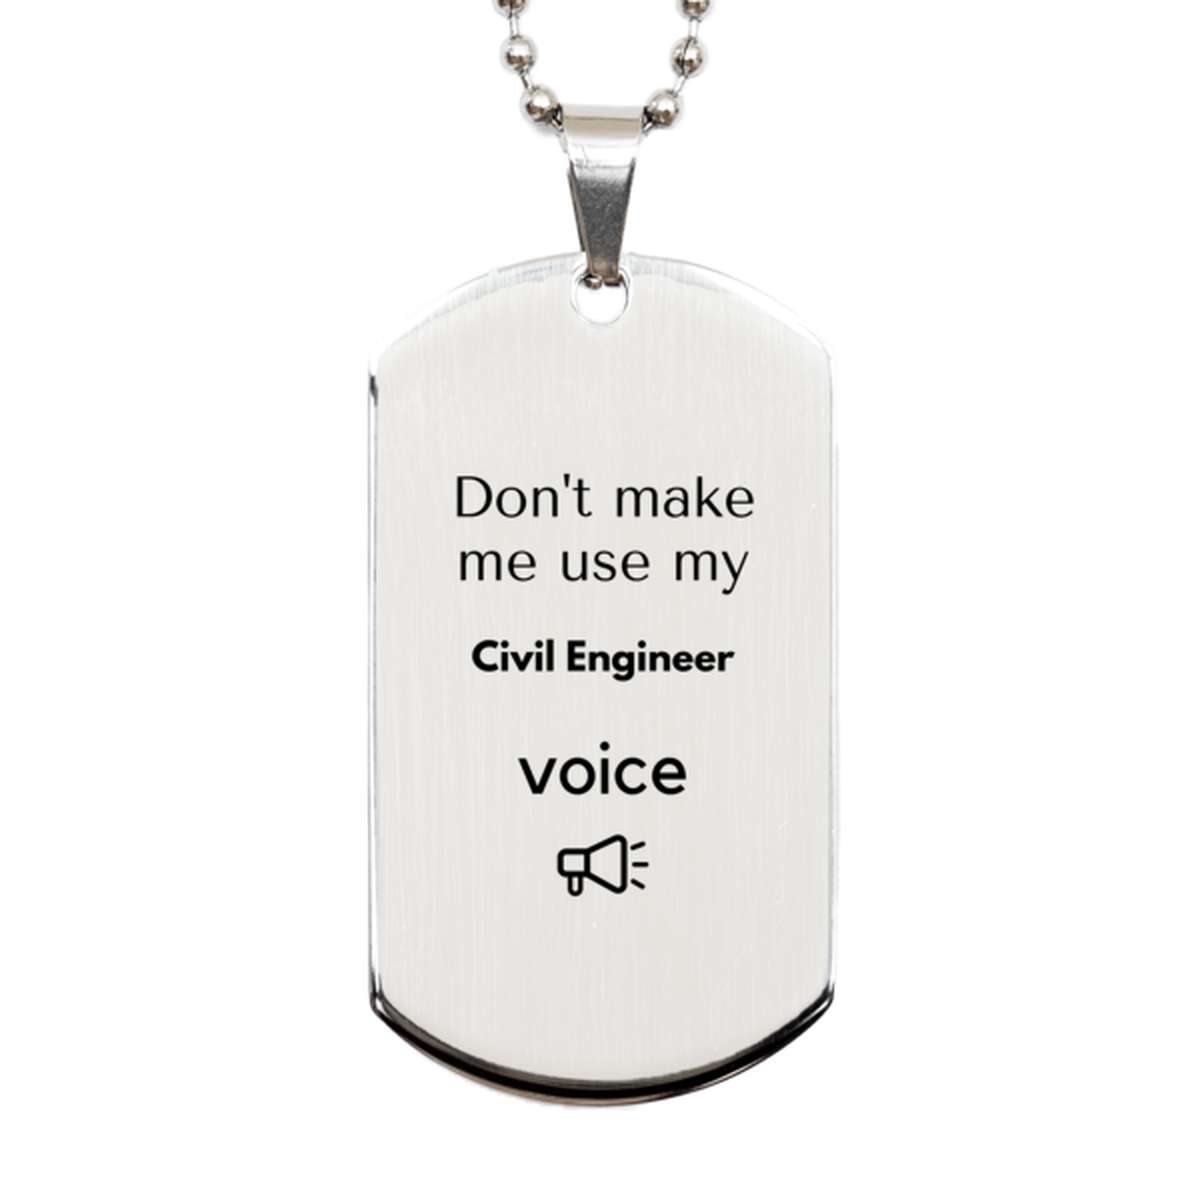 Don't make me use my Civil Engineer voice, Sarcasm Civil Engineer Gifts, Christmas Civil Engineer Silver Dog Tag Birthday Unique Gifts For Civil Engineer Coworkers, Men, Women, Colleague, Friends